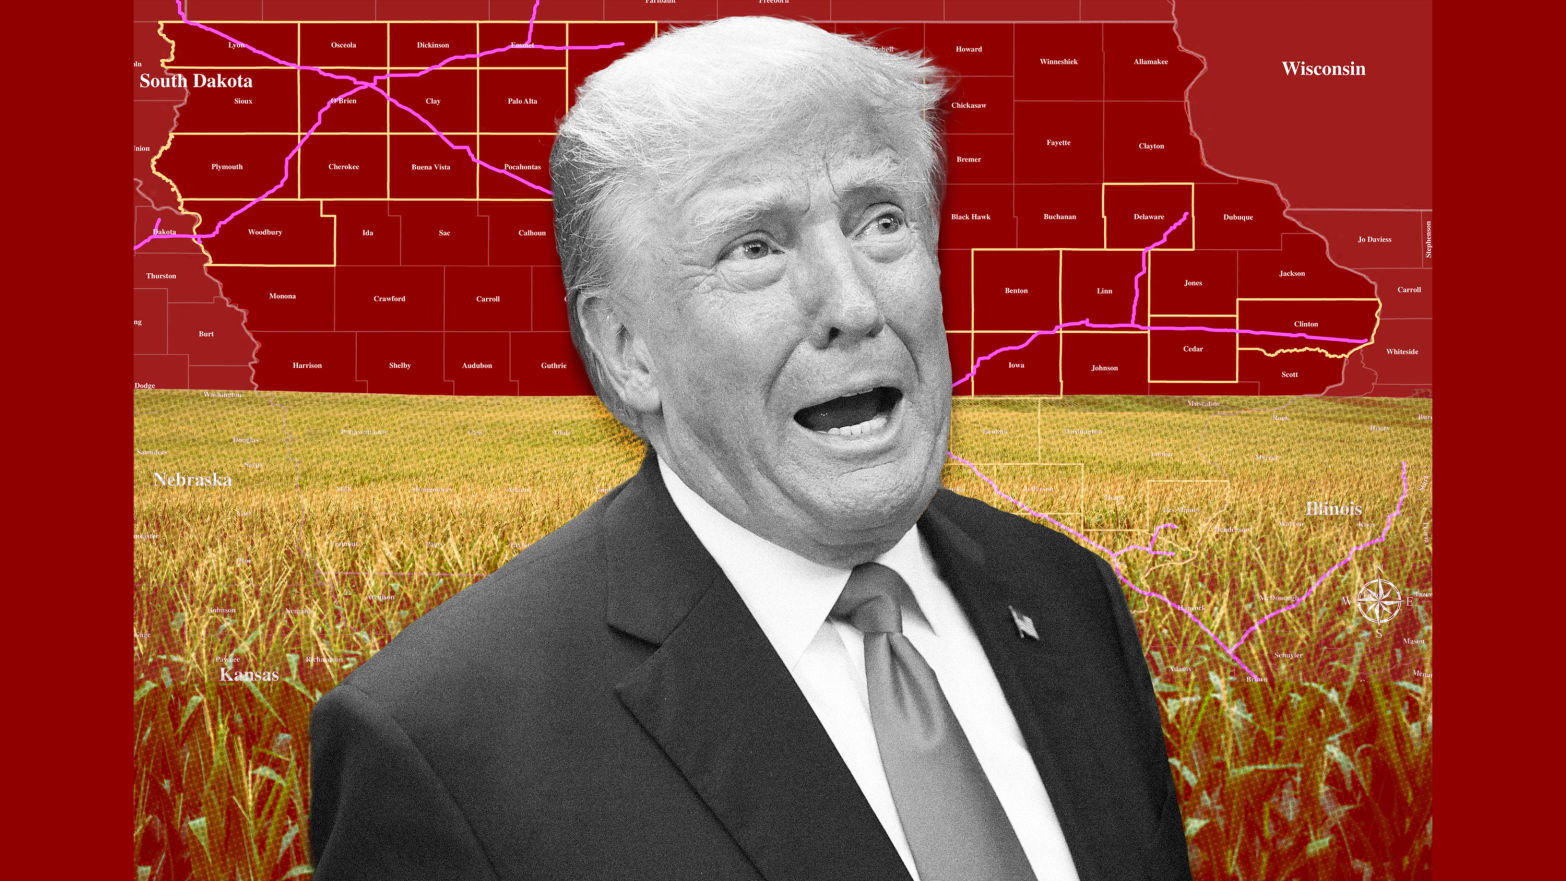 A photo illustration of Trump over a proposed map of CO2 pipelines running through Iowa state.